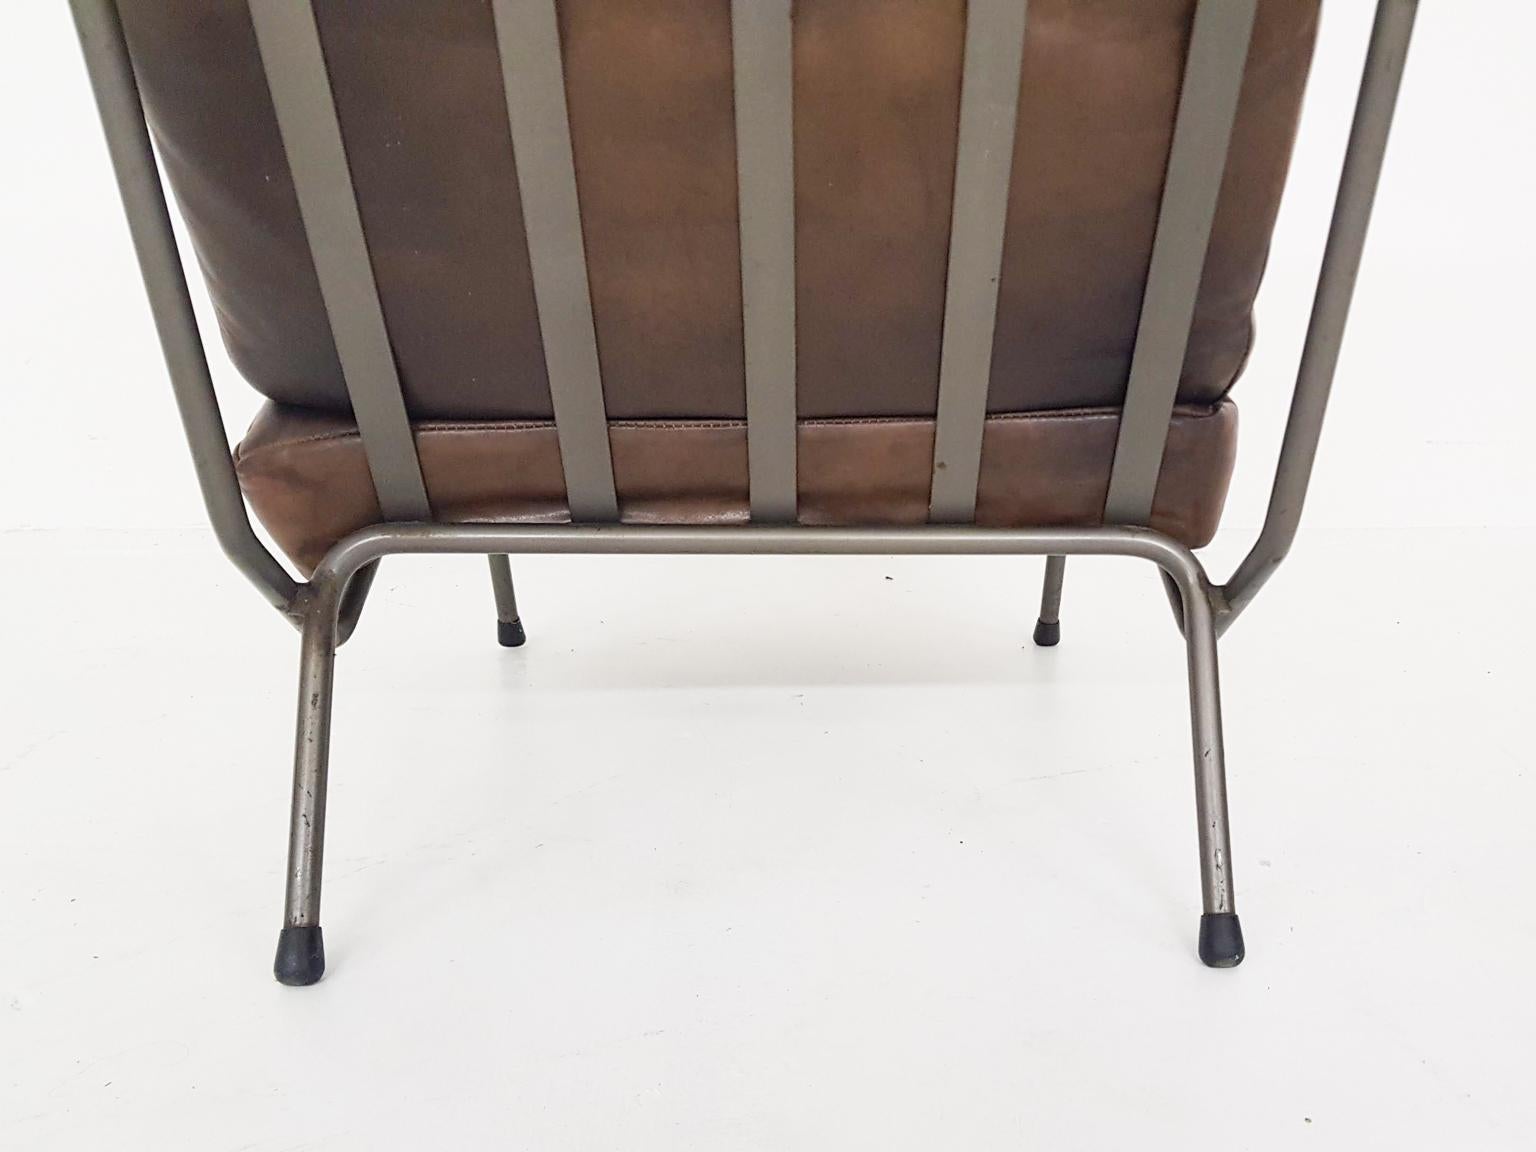 Metal Koene Oberman for Gelderland Lounge Chair in Leather, The Netherlands 1954 For Sale